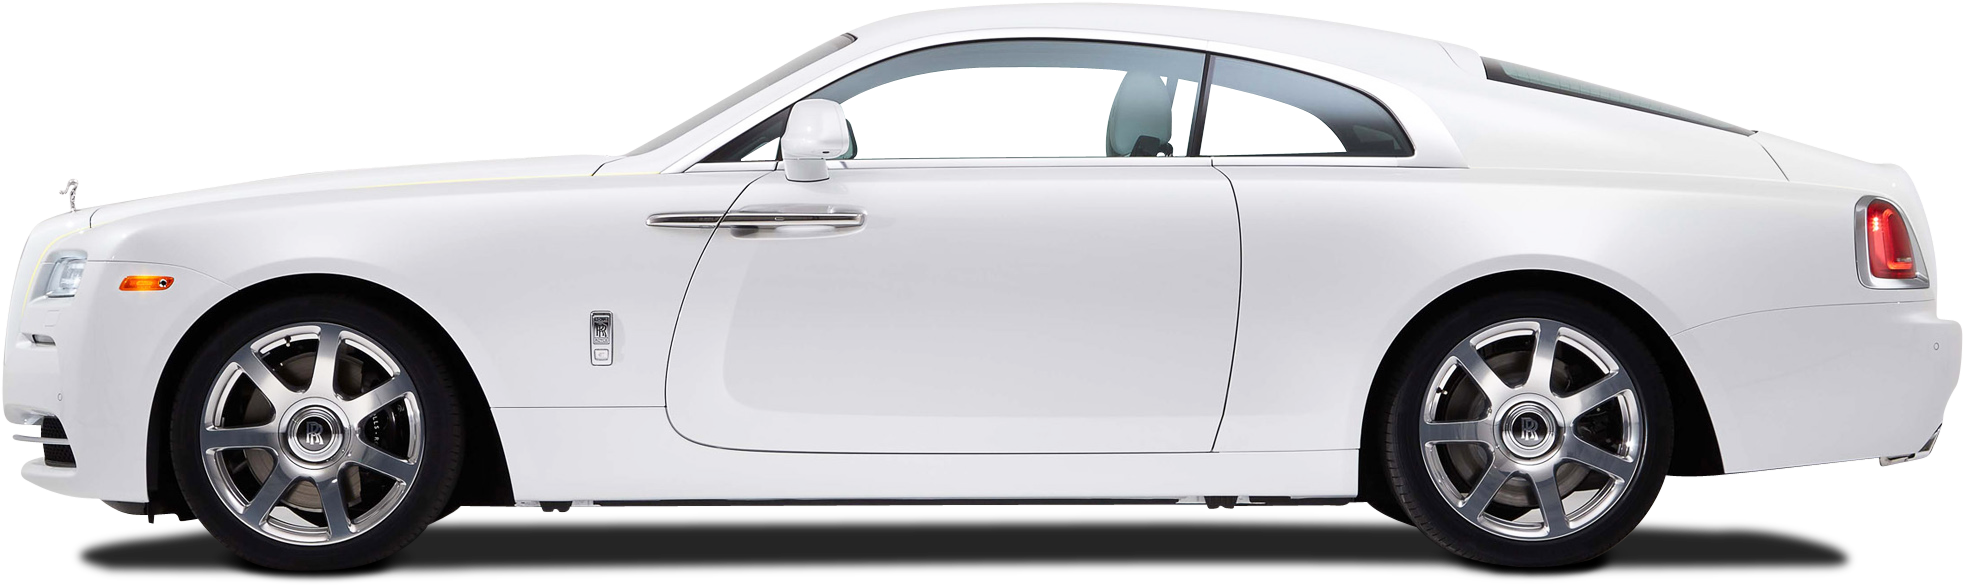 White Rolls Royce, Rolls Royce Cars, Rolls Royce Images, - Rolls Royce Wraith Side View Clipart (2029x677), Png Download